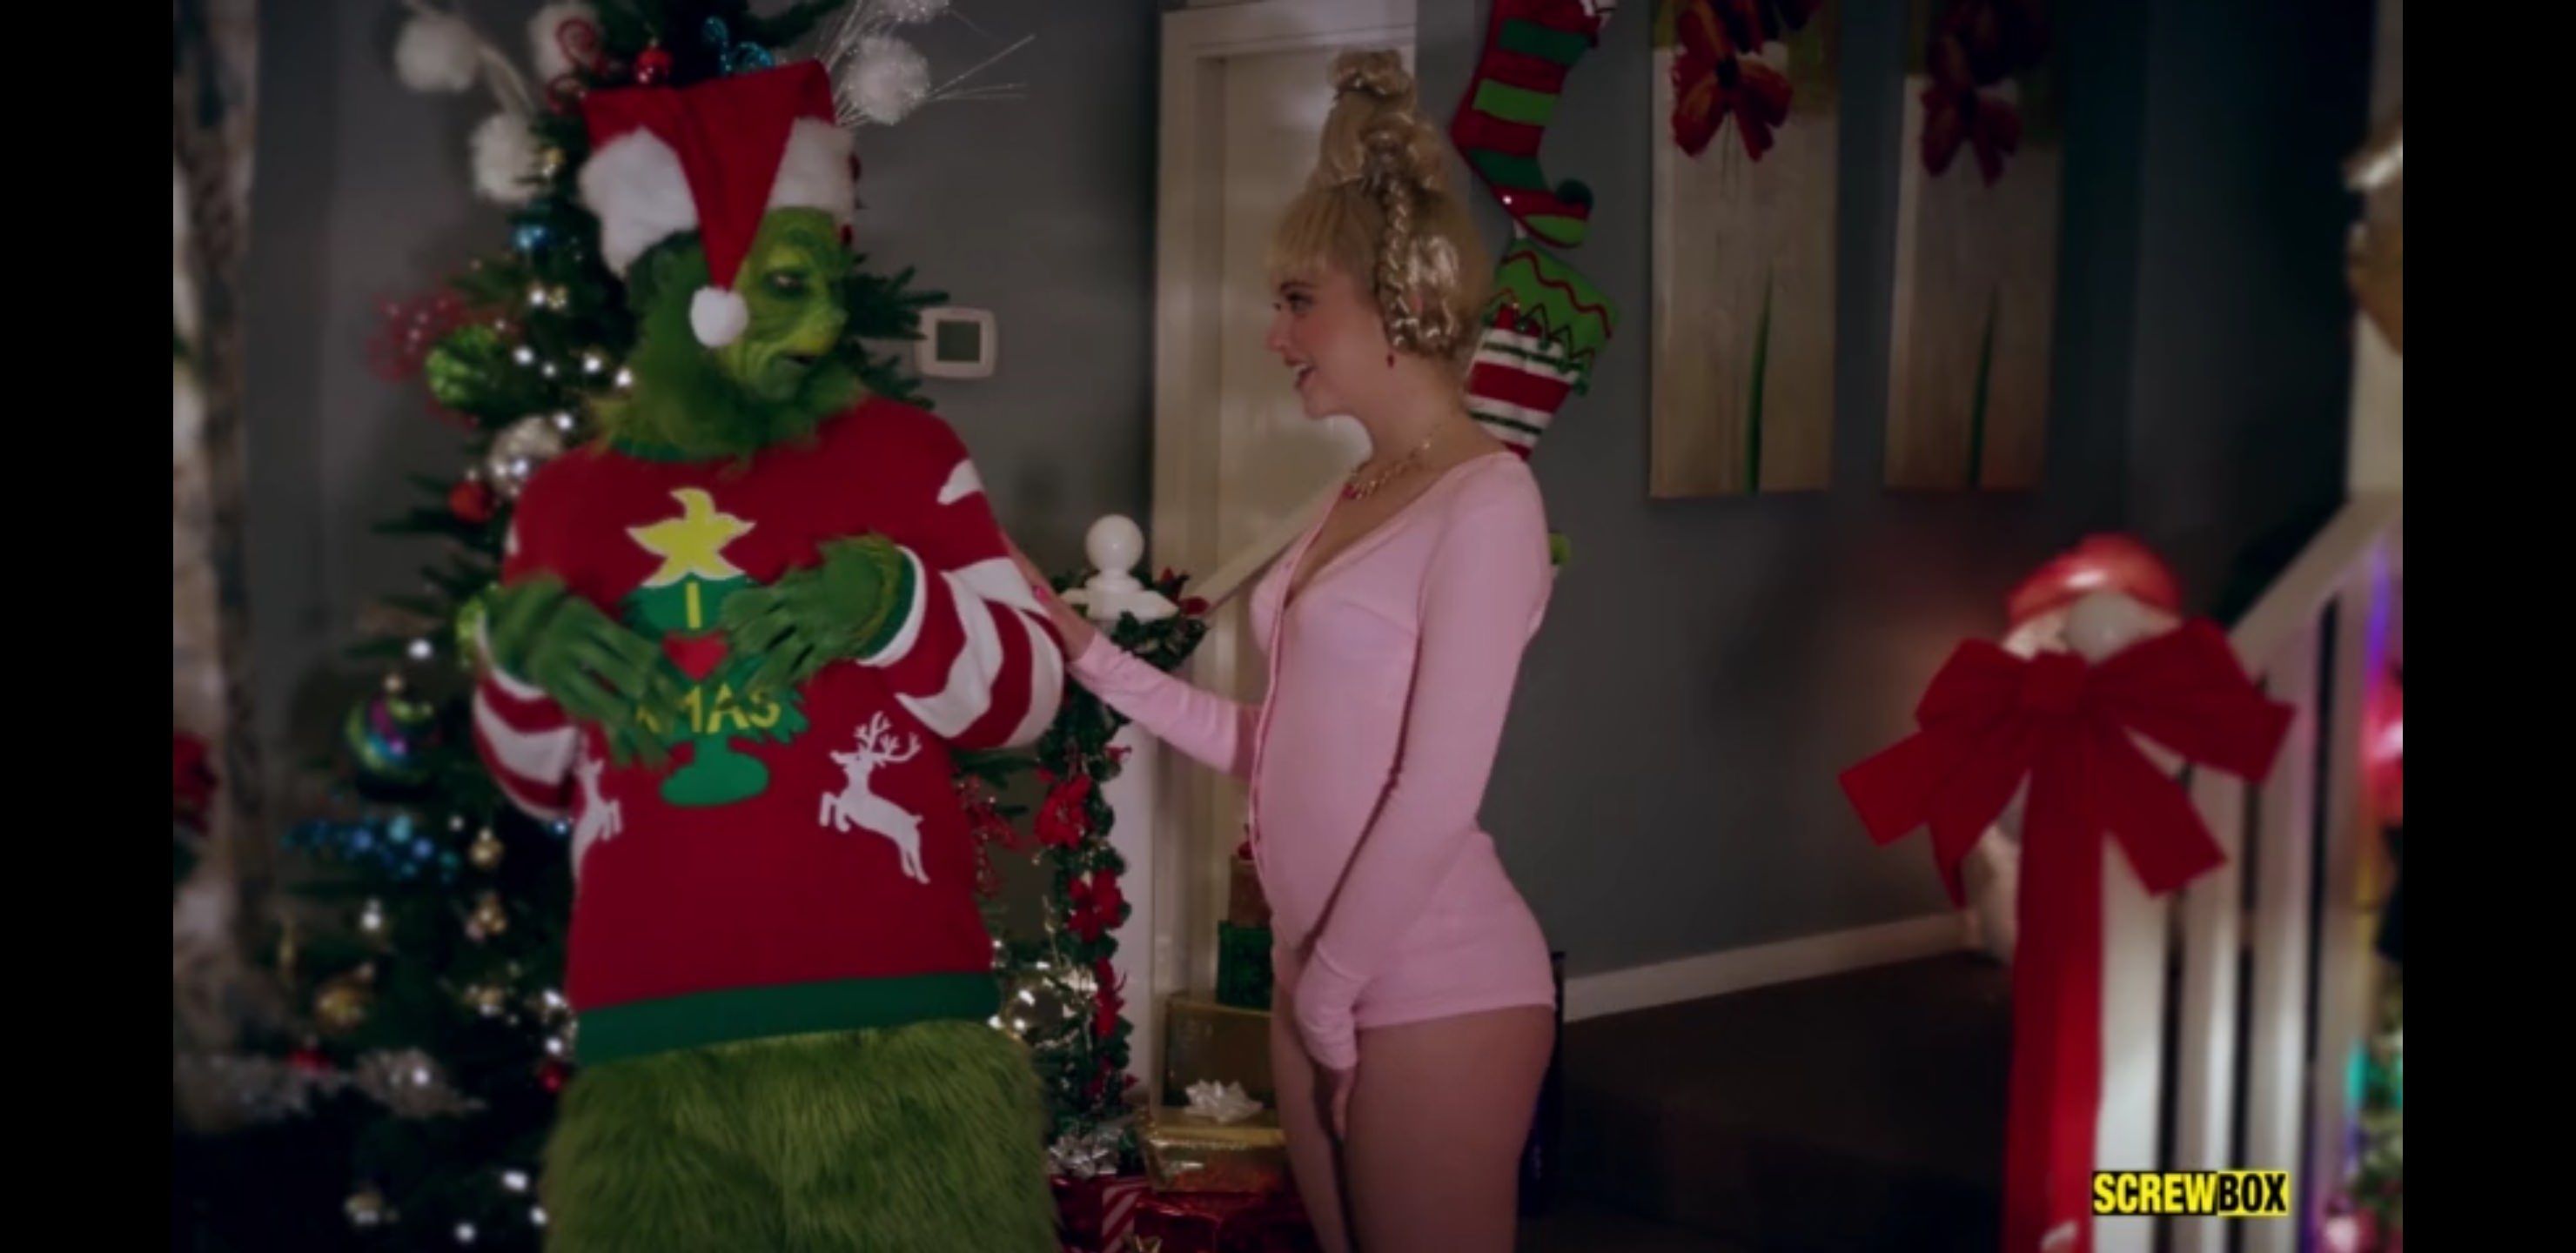 I think i downloaded the wrong grinch movie